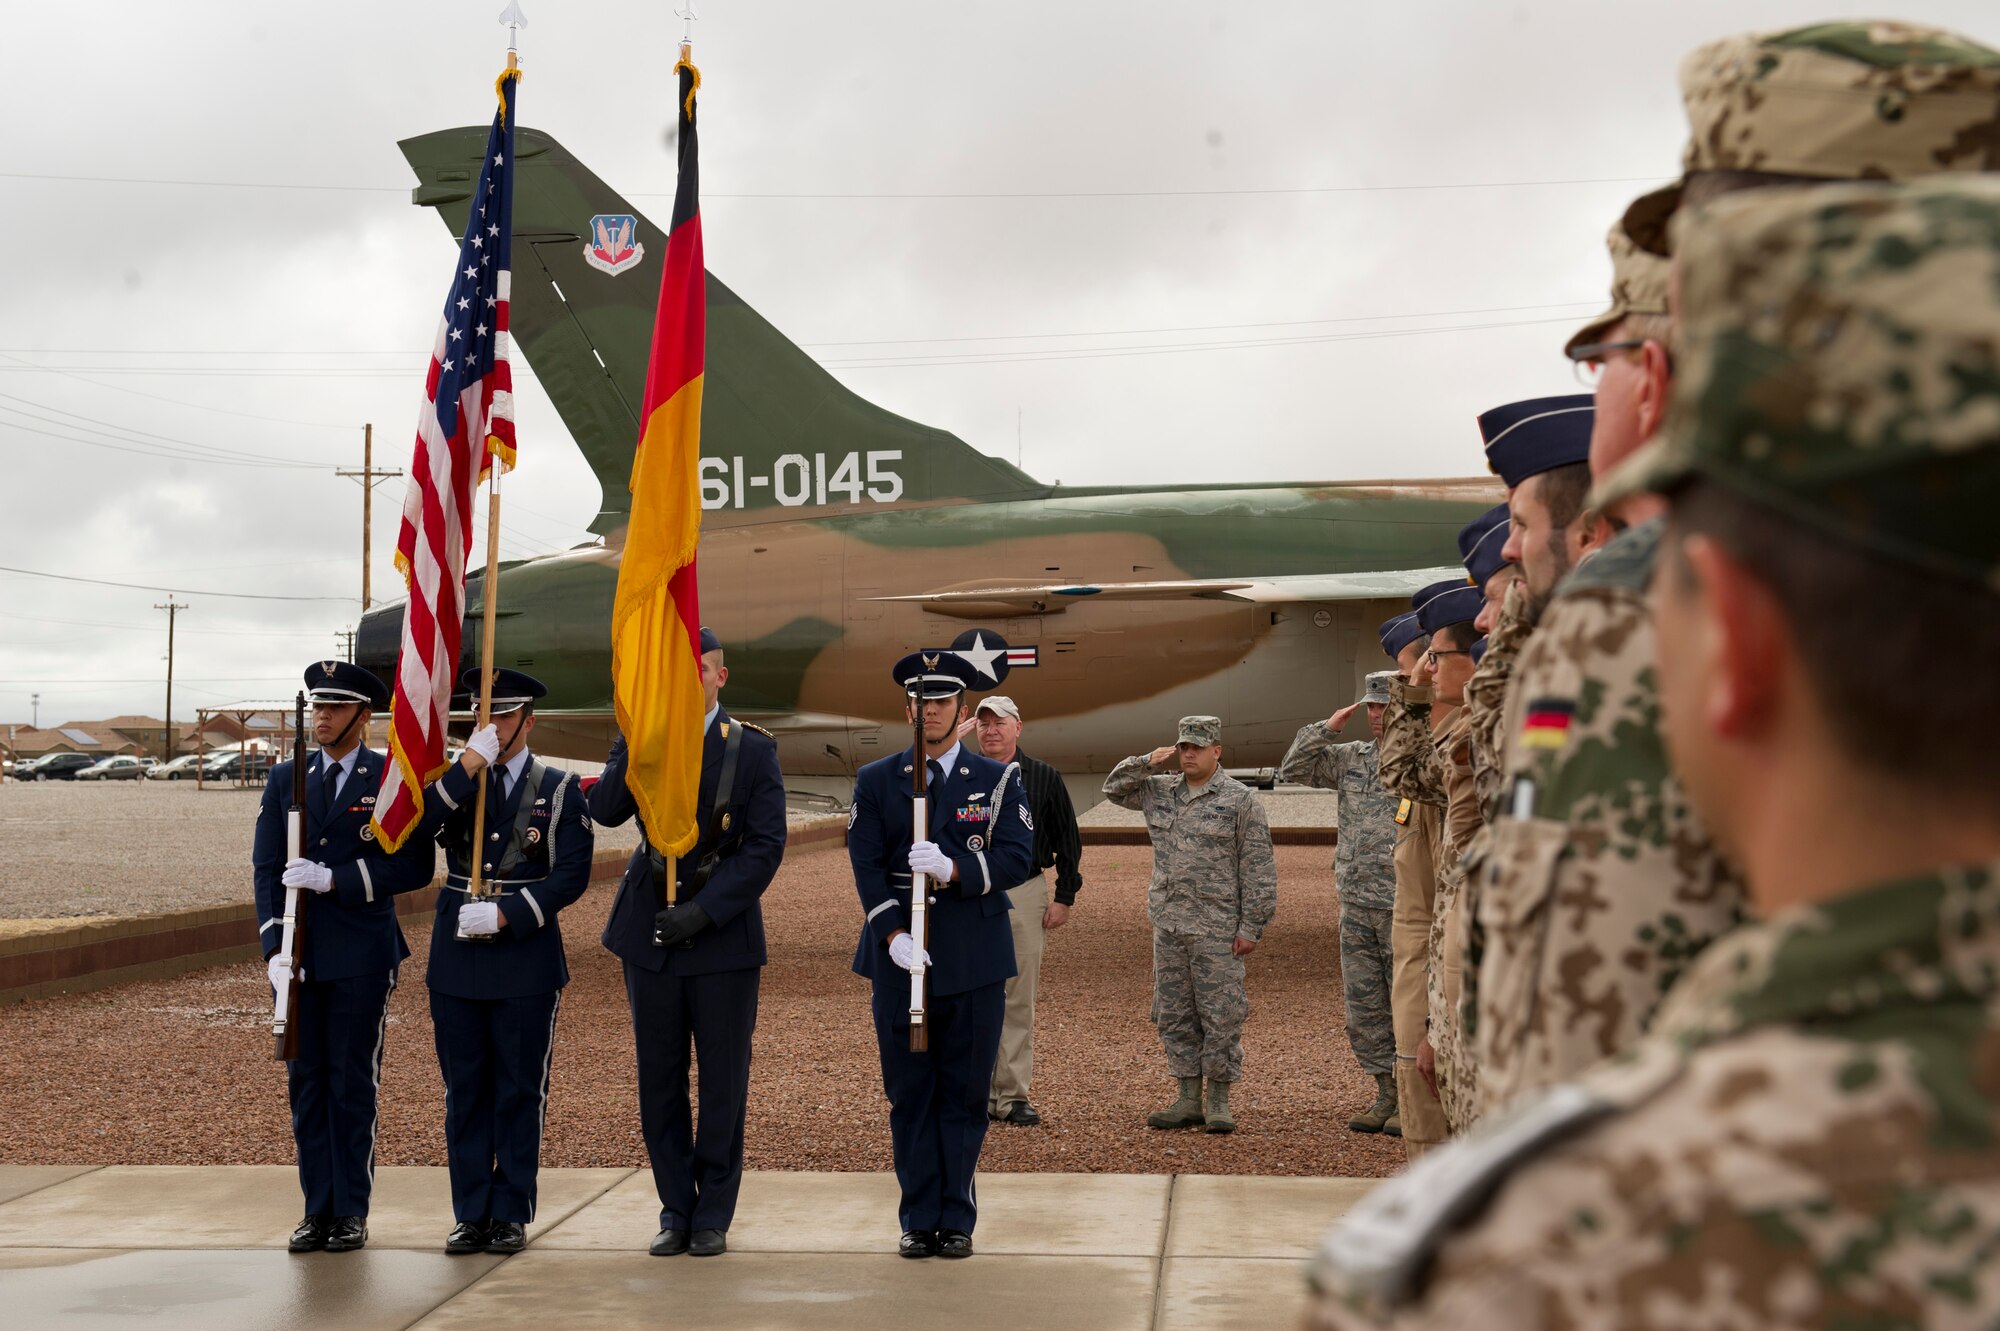 Holloman Air Force Base’s Steel Talons and Luftwaffe Honor Guard present the colors at the unveiling ceremony for the Tornado 43+75 in Heritage Park. History was made Sep. 19, when a German Air Force static aircraft was unveiled in Heritage Park by Lt. Gen. Martin Schellis, German Air Force Operational Forces Command commander, and Col. Robert Kiebler, 49th Wing commander. The GAF Training Center and the Tornados are a significant part of military aviation operations in and around Holloman Air Force Base and White Sands Missile Range. (U.S. photo by Staff Sgt. E’Lysia Wray/ Released)